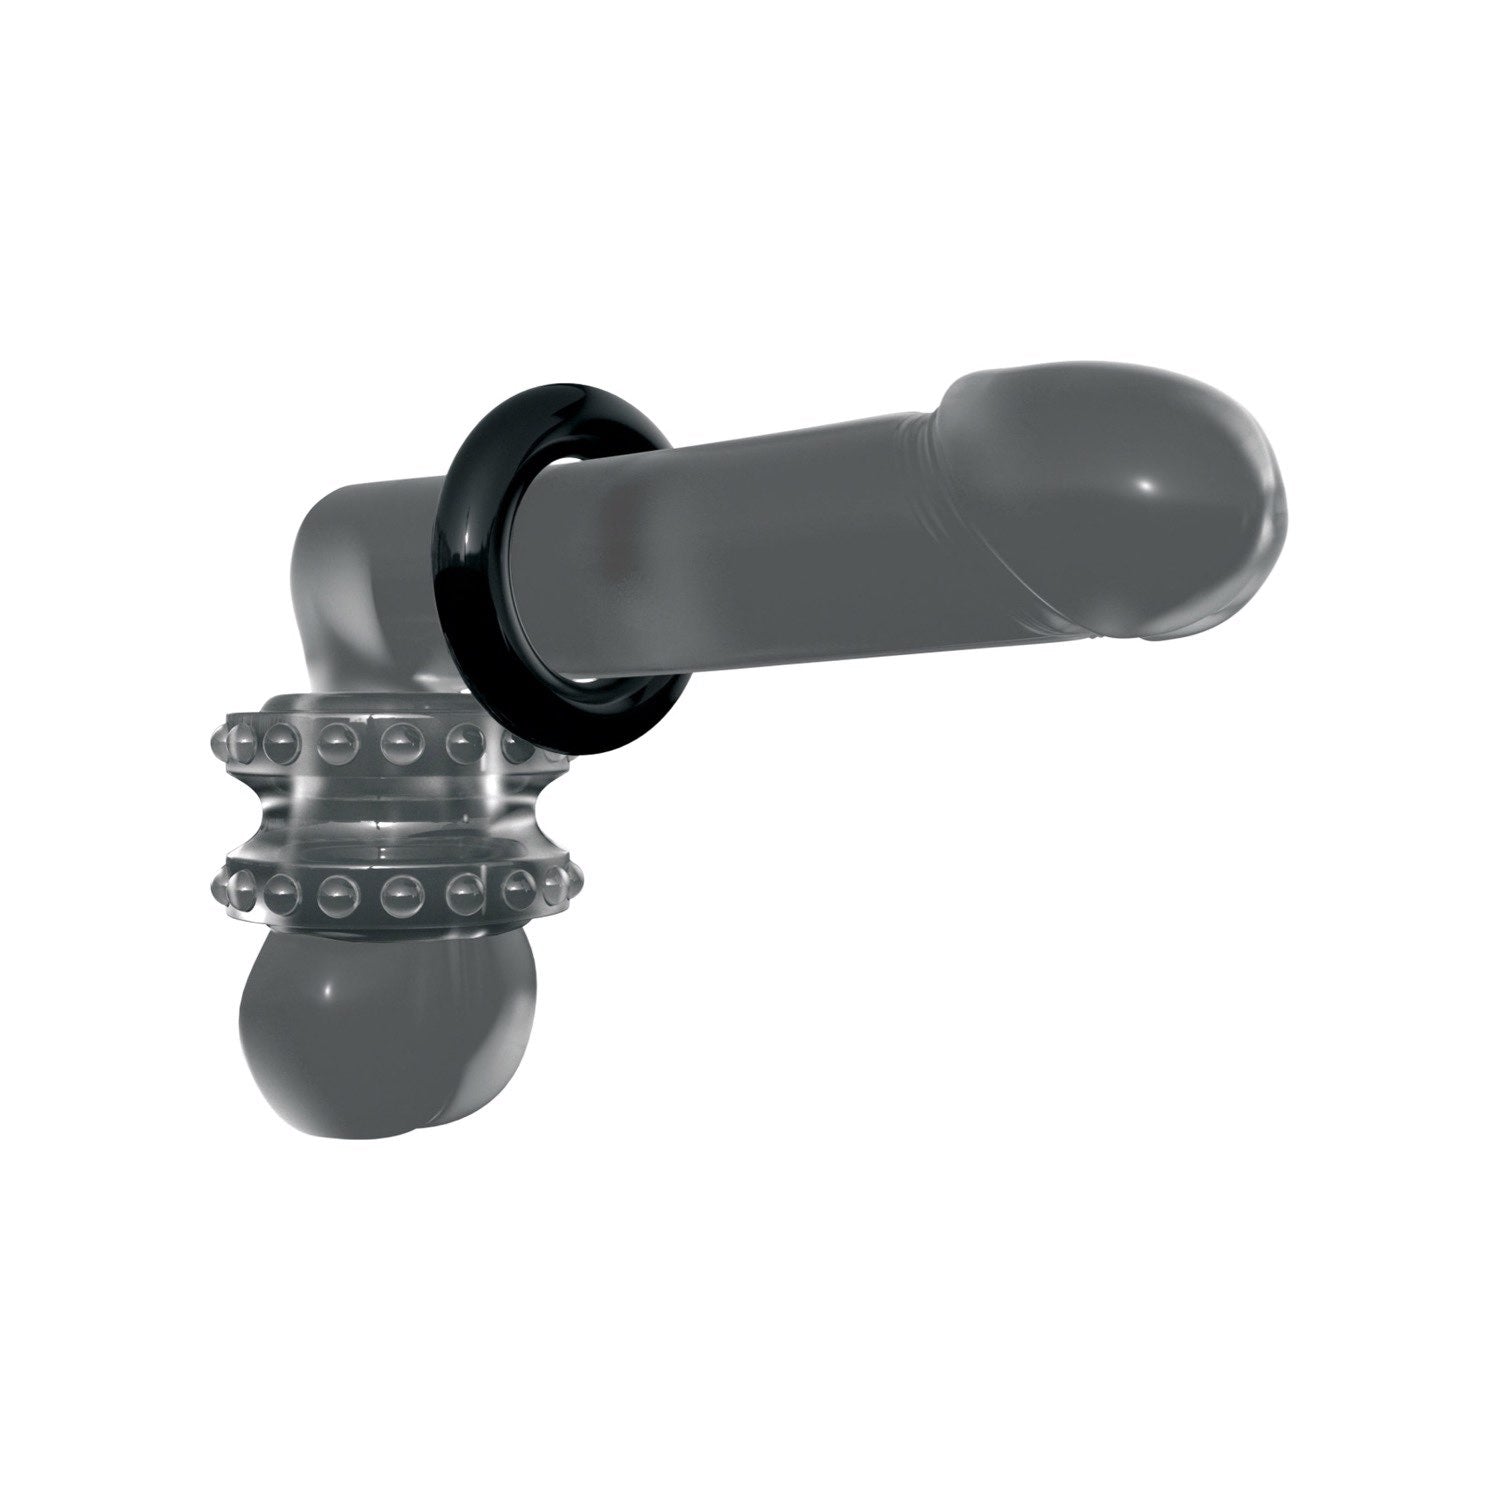 Sir Richards Pro Performance C-Ring - Clear/Black Cock Ring by Pipedream